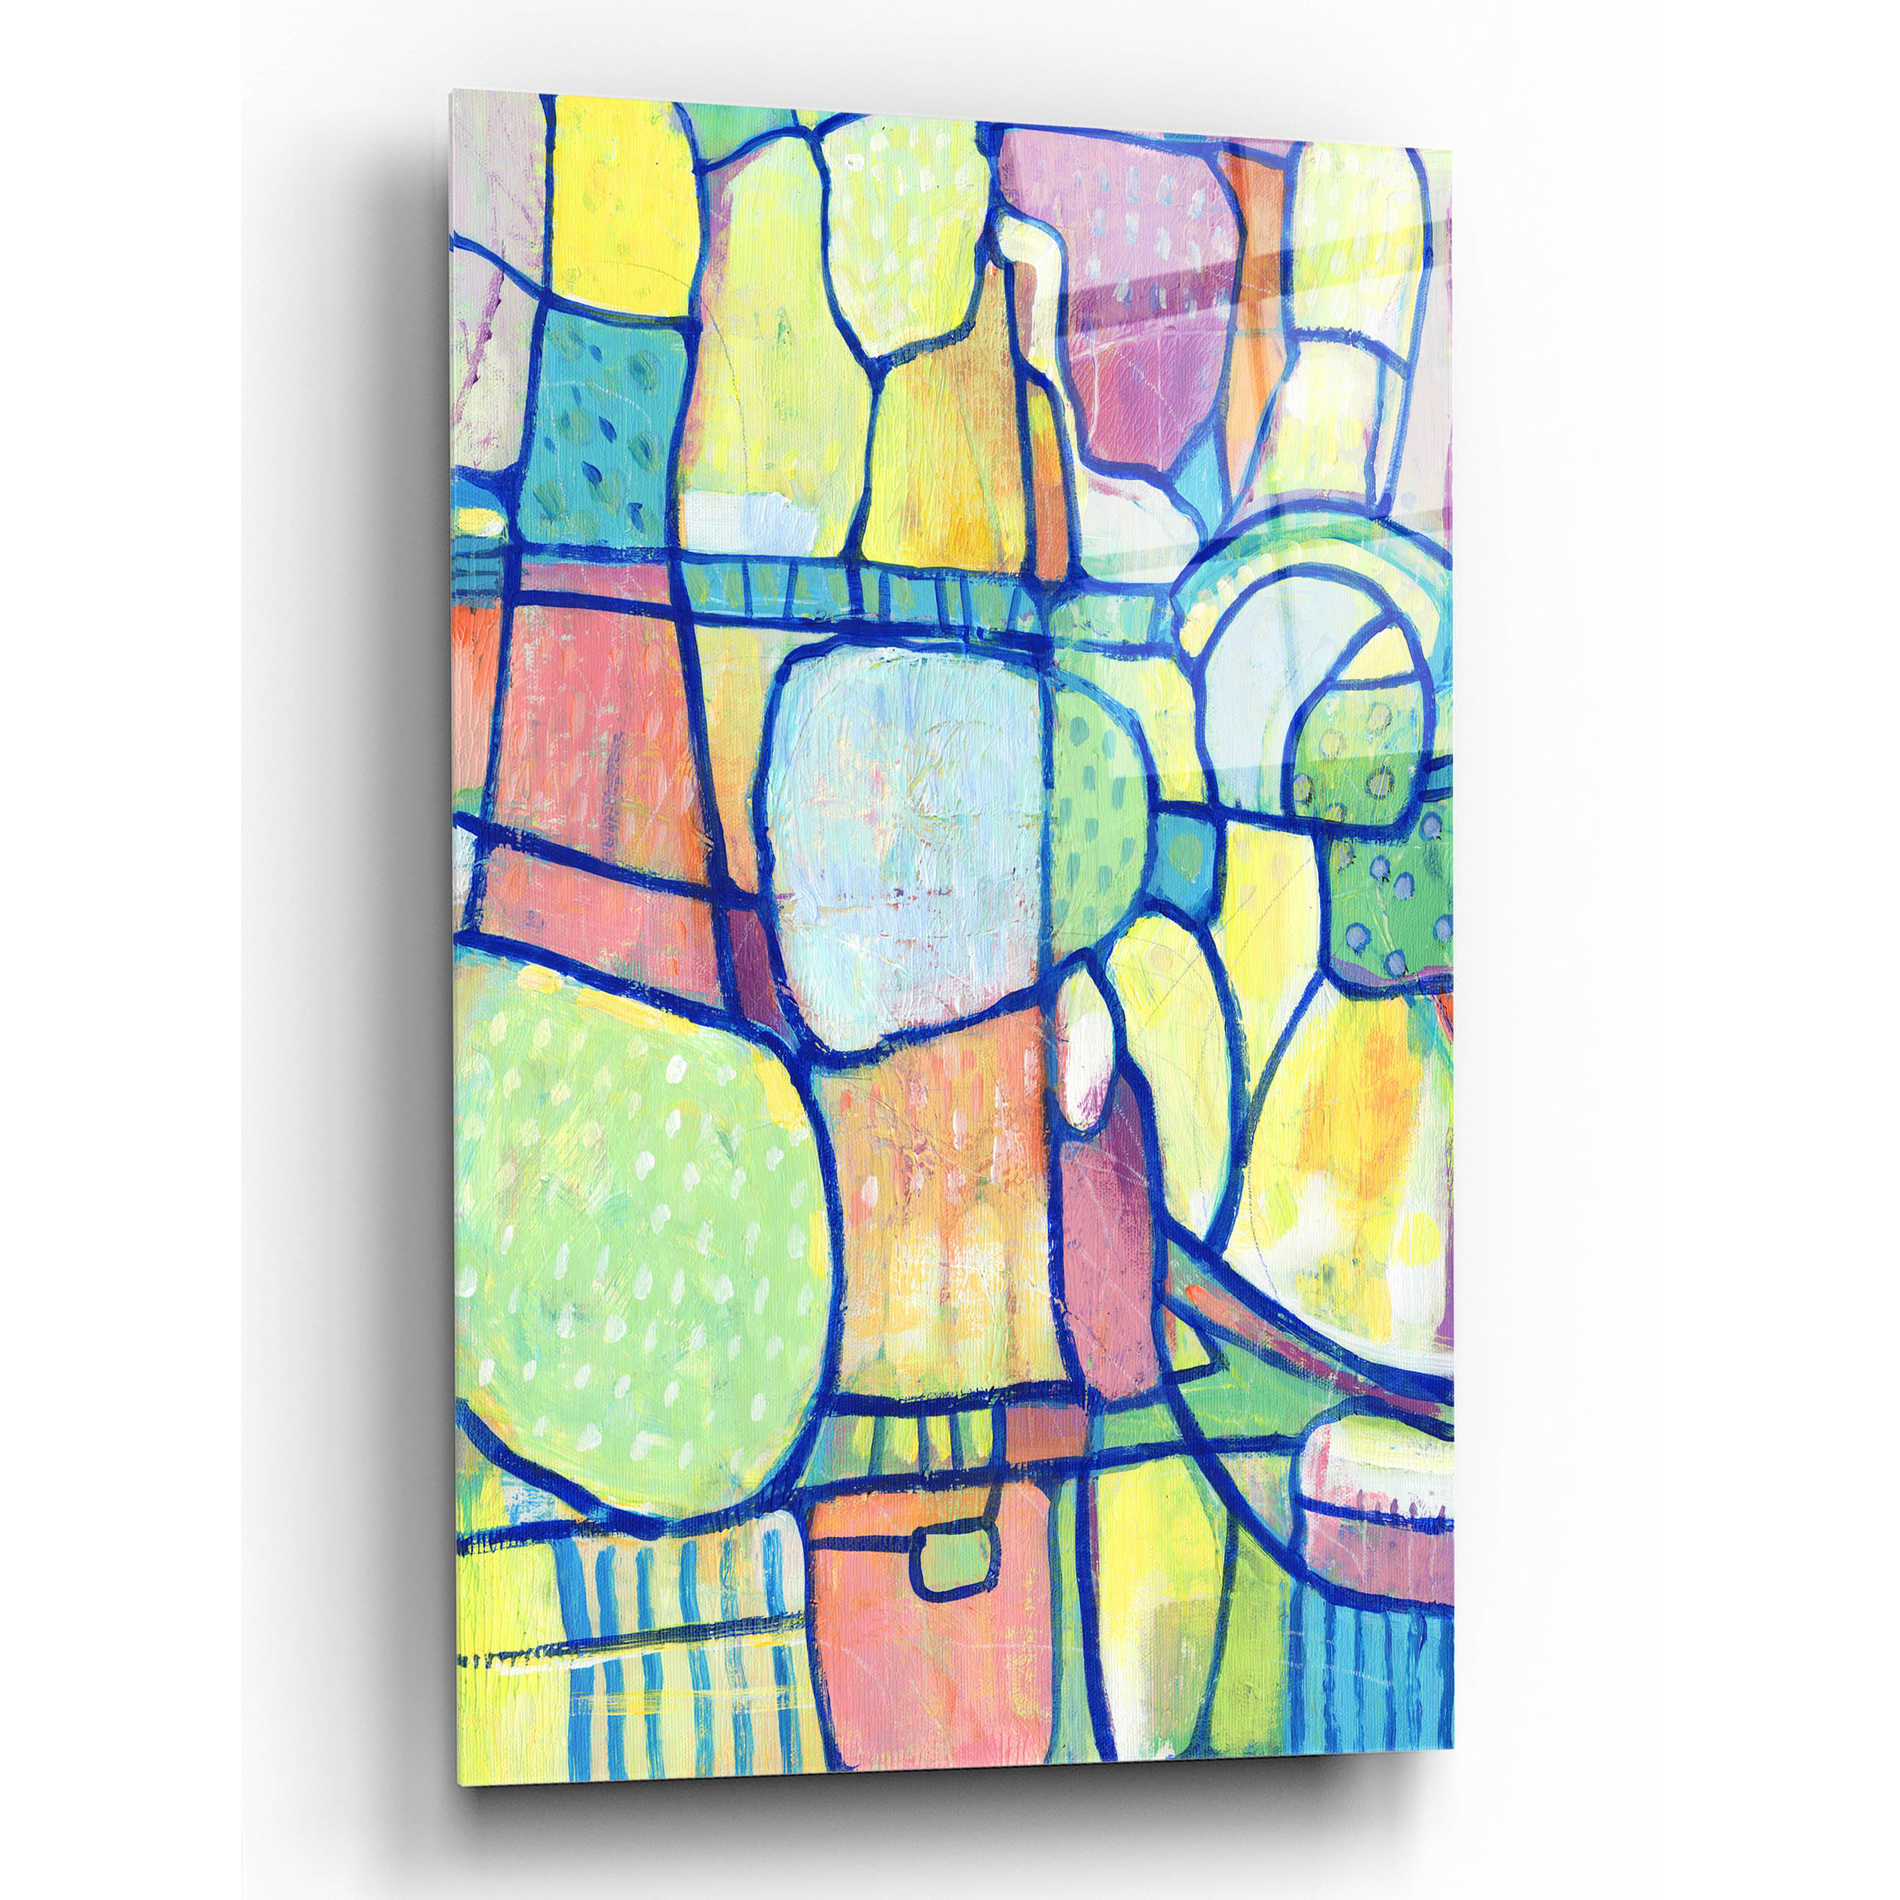 Epic Art 'Stained Glass Composition I' by Tim O'Toole, Acrylic Glass Wall Art,12x16